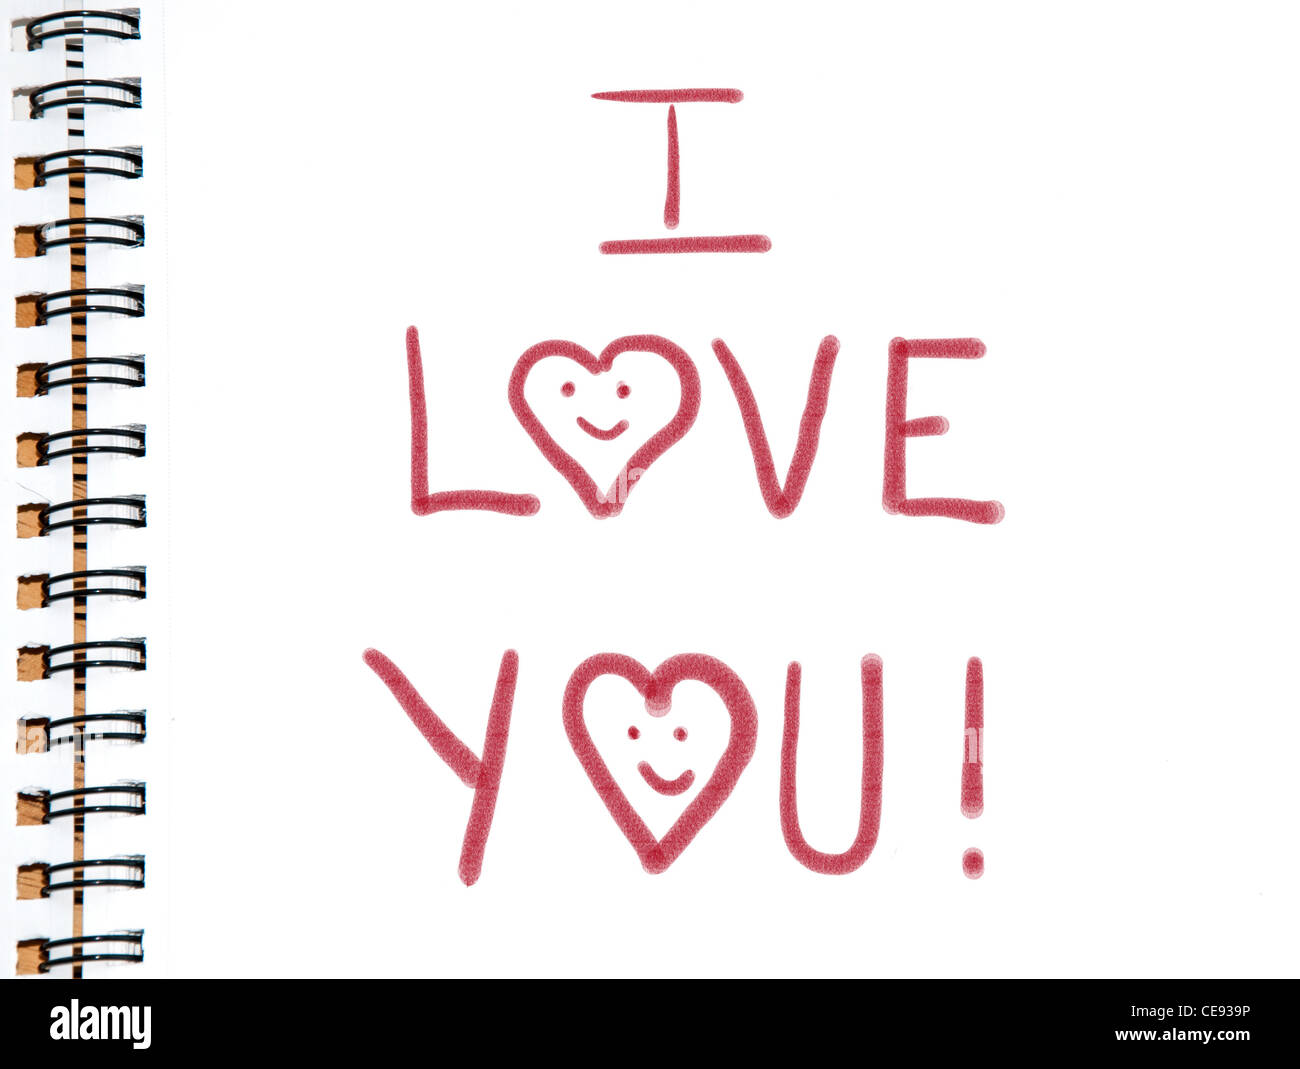 I love you painted in red color on white sketchbook page with hearts for letter o - a Valentine design Stock Photo